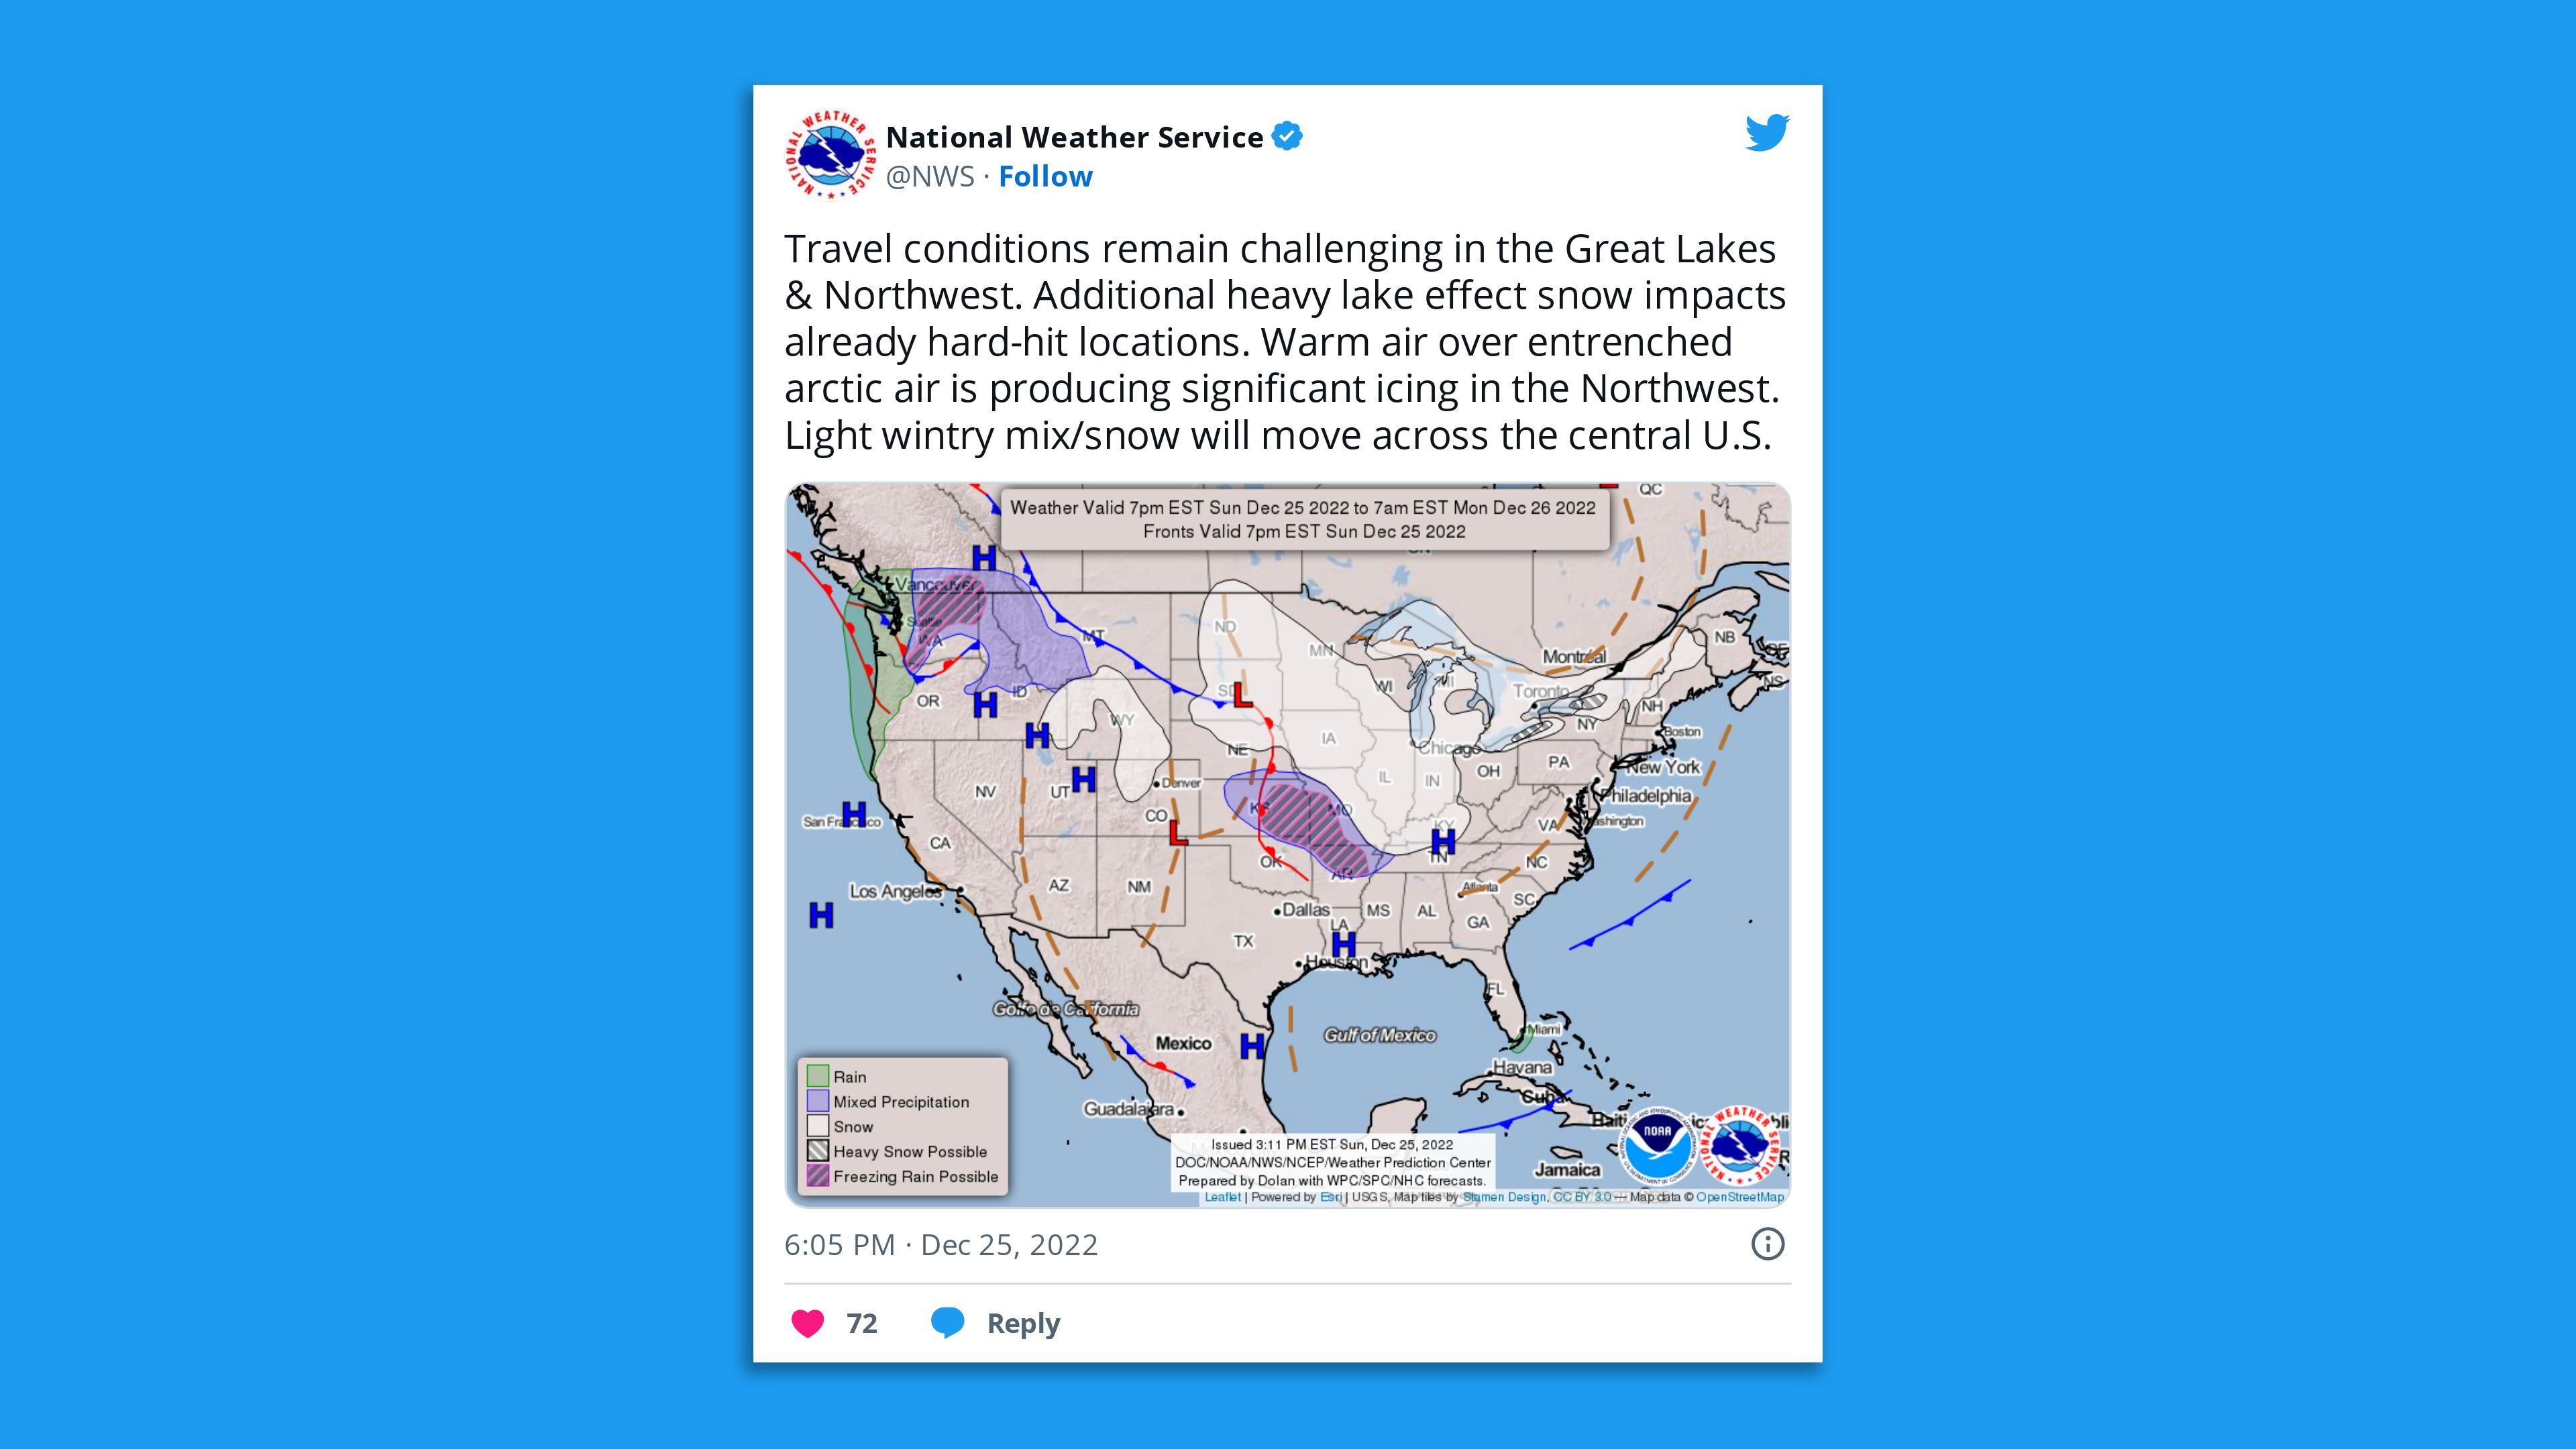 A screenshot of an NWS tweet stating "Travel conditions remain challenging in the Great Lakes & Northwest. Additional heavy lake effect snow impacts already hard-hit locations."